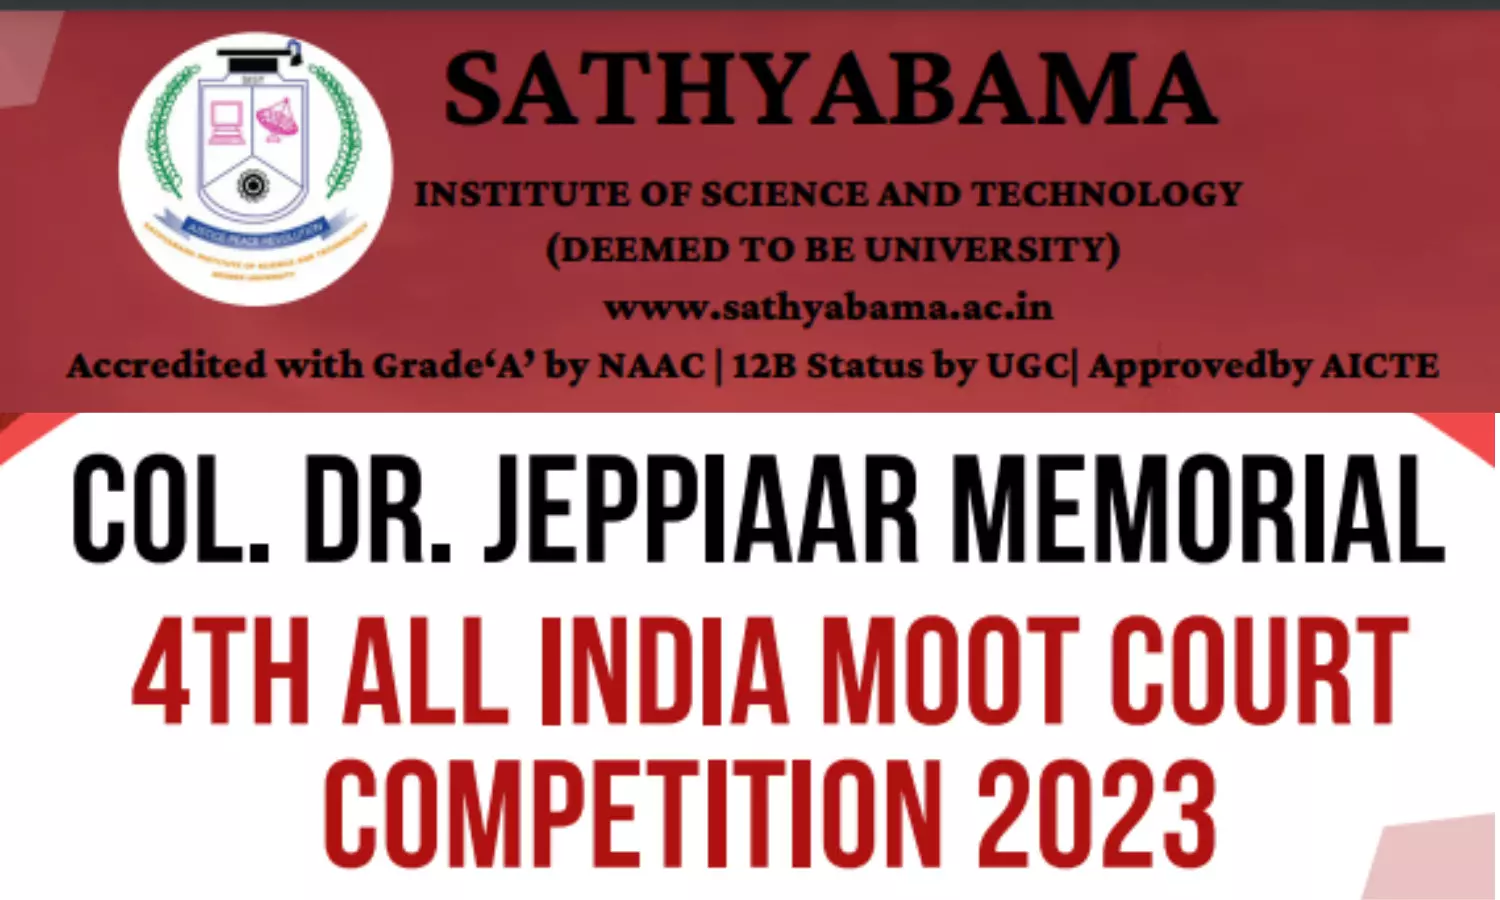 Col. Dr. 4th Jeppiaar All India Moot Court Competition 2023 | School of Law, Sathyabama Institute of Science and Technology | March 29th - April 12th, 2023